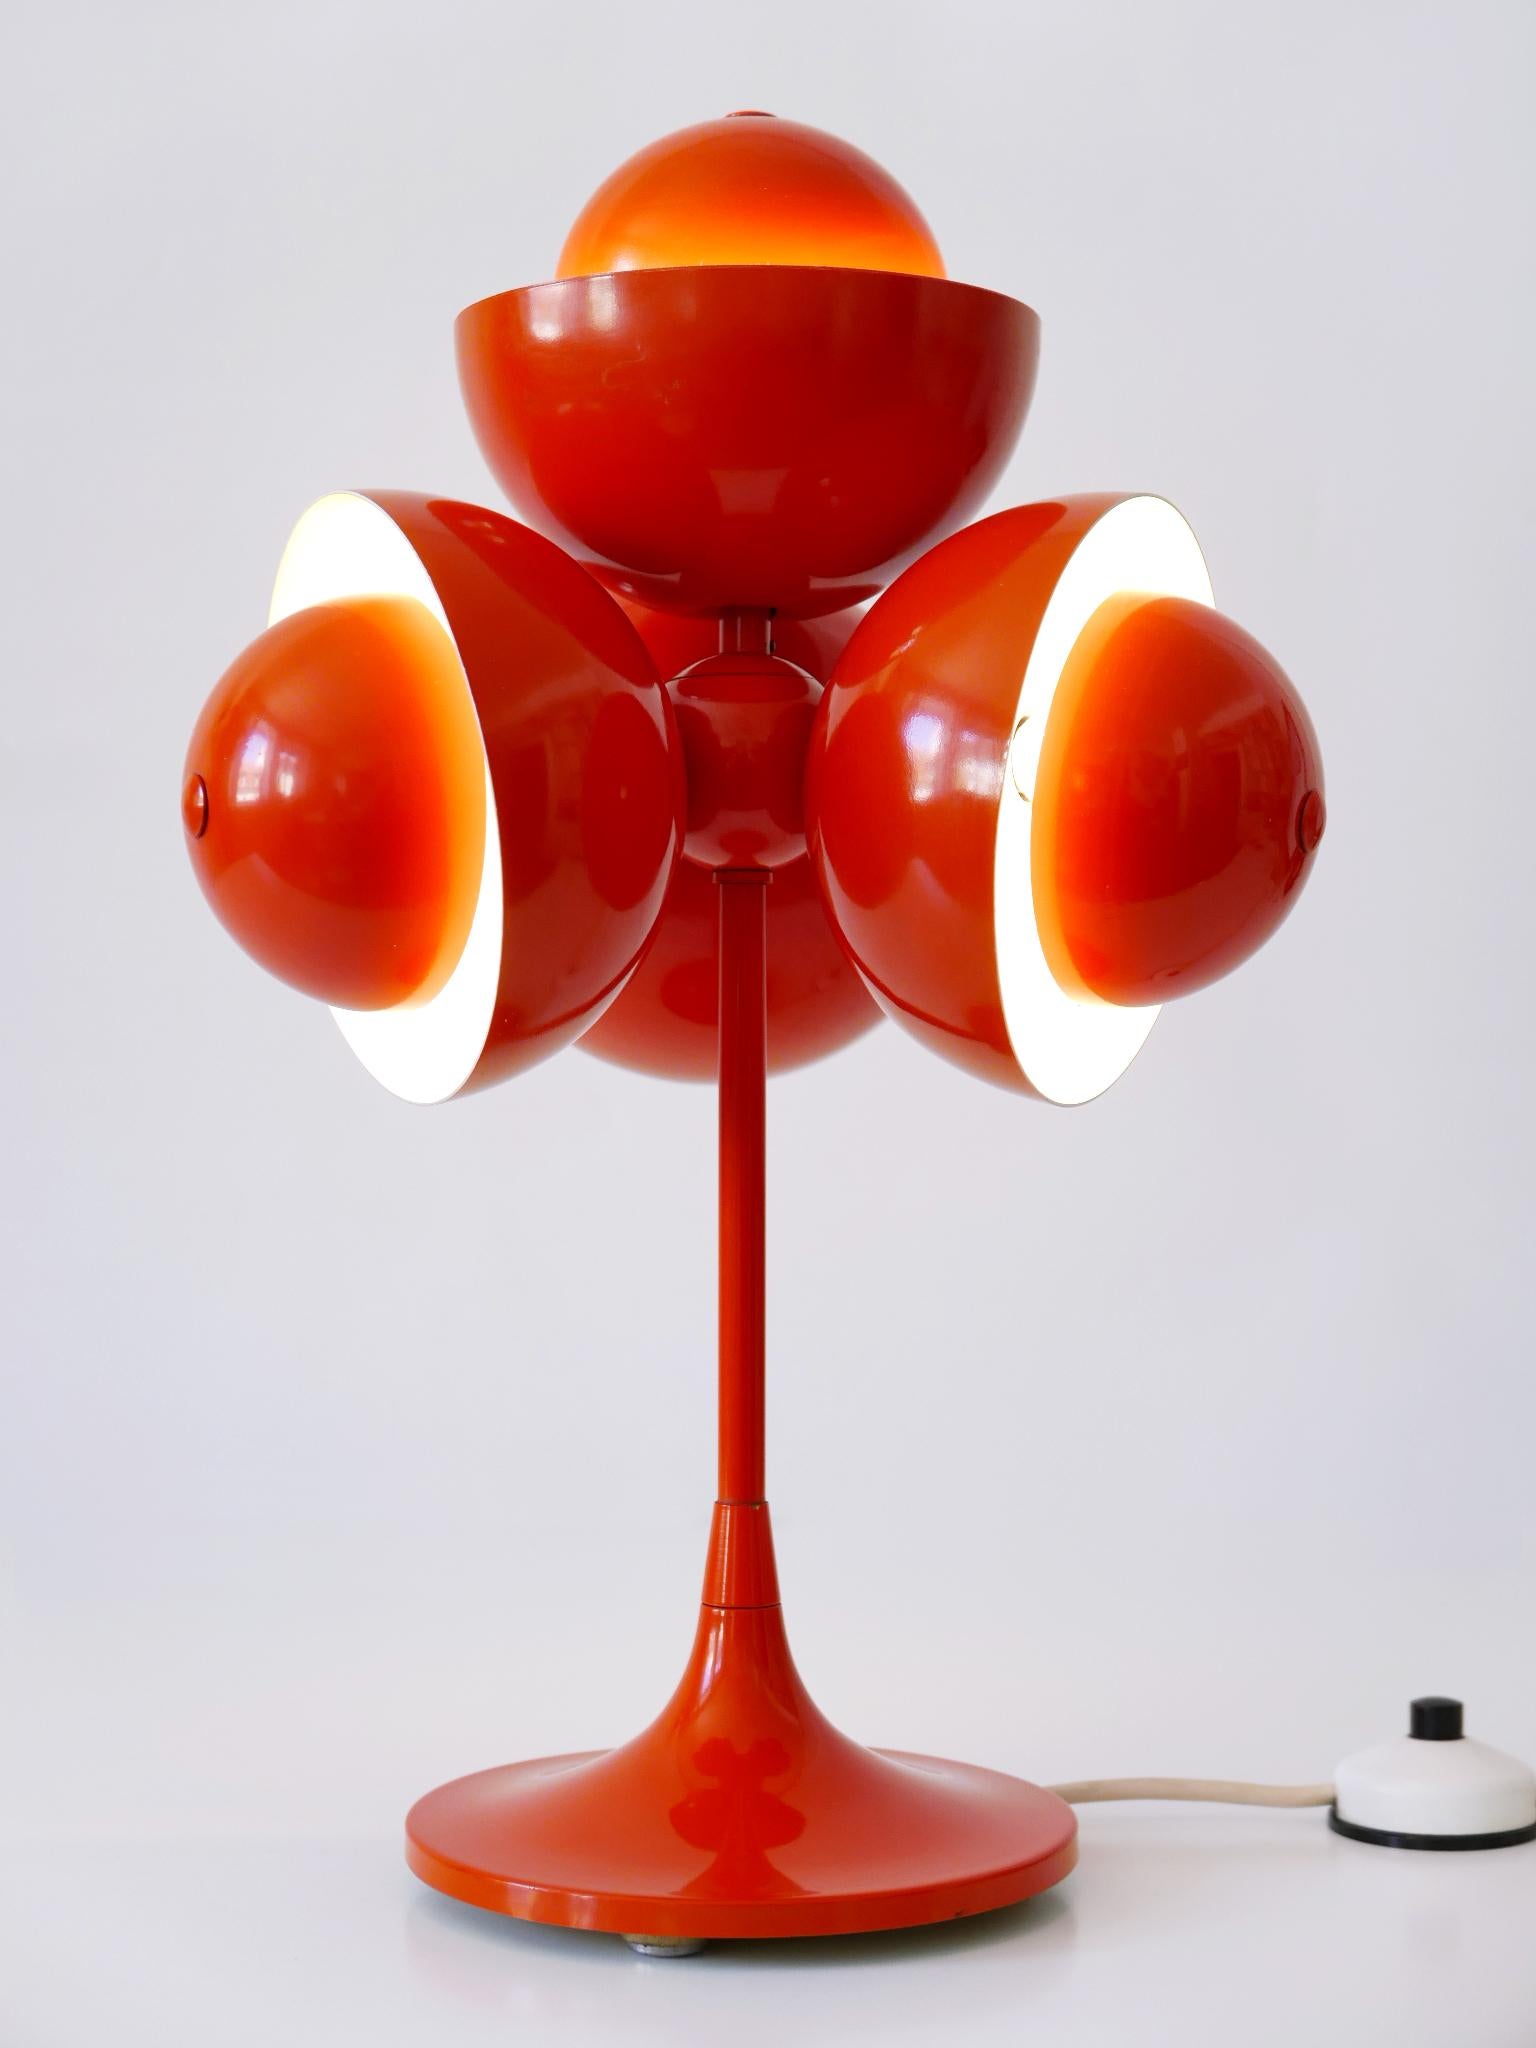 Extremely rare & highly decorative Mid-Century Modern flowerpot table lamp. Designed & manufactured probably in Germany, 1970s.

With 3-stage lighting option: only top or only three or all four.

Executed in white & orange painted aluminium and